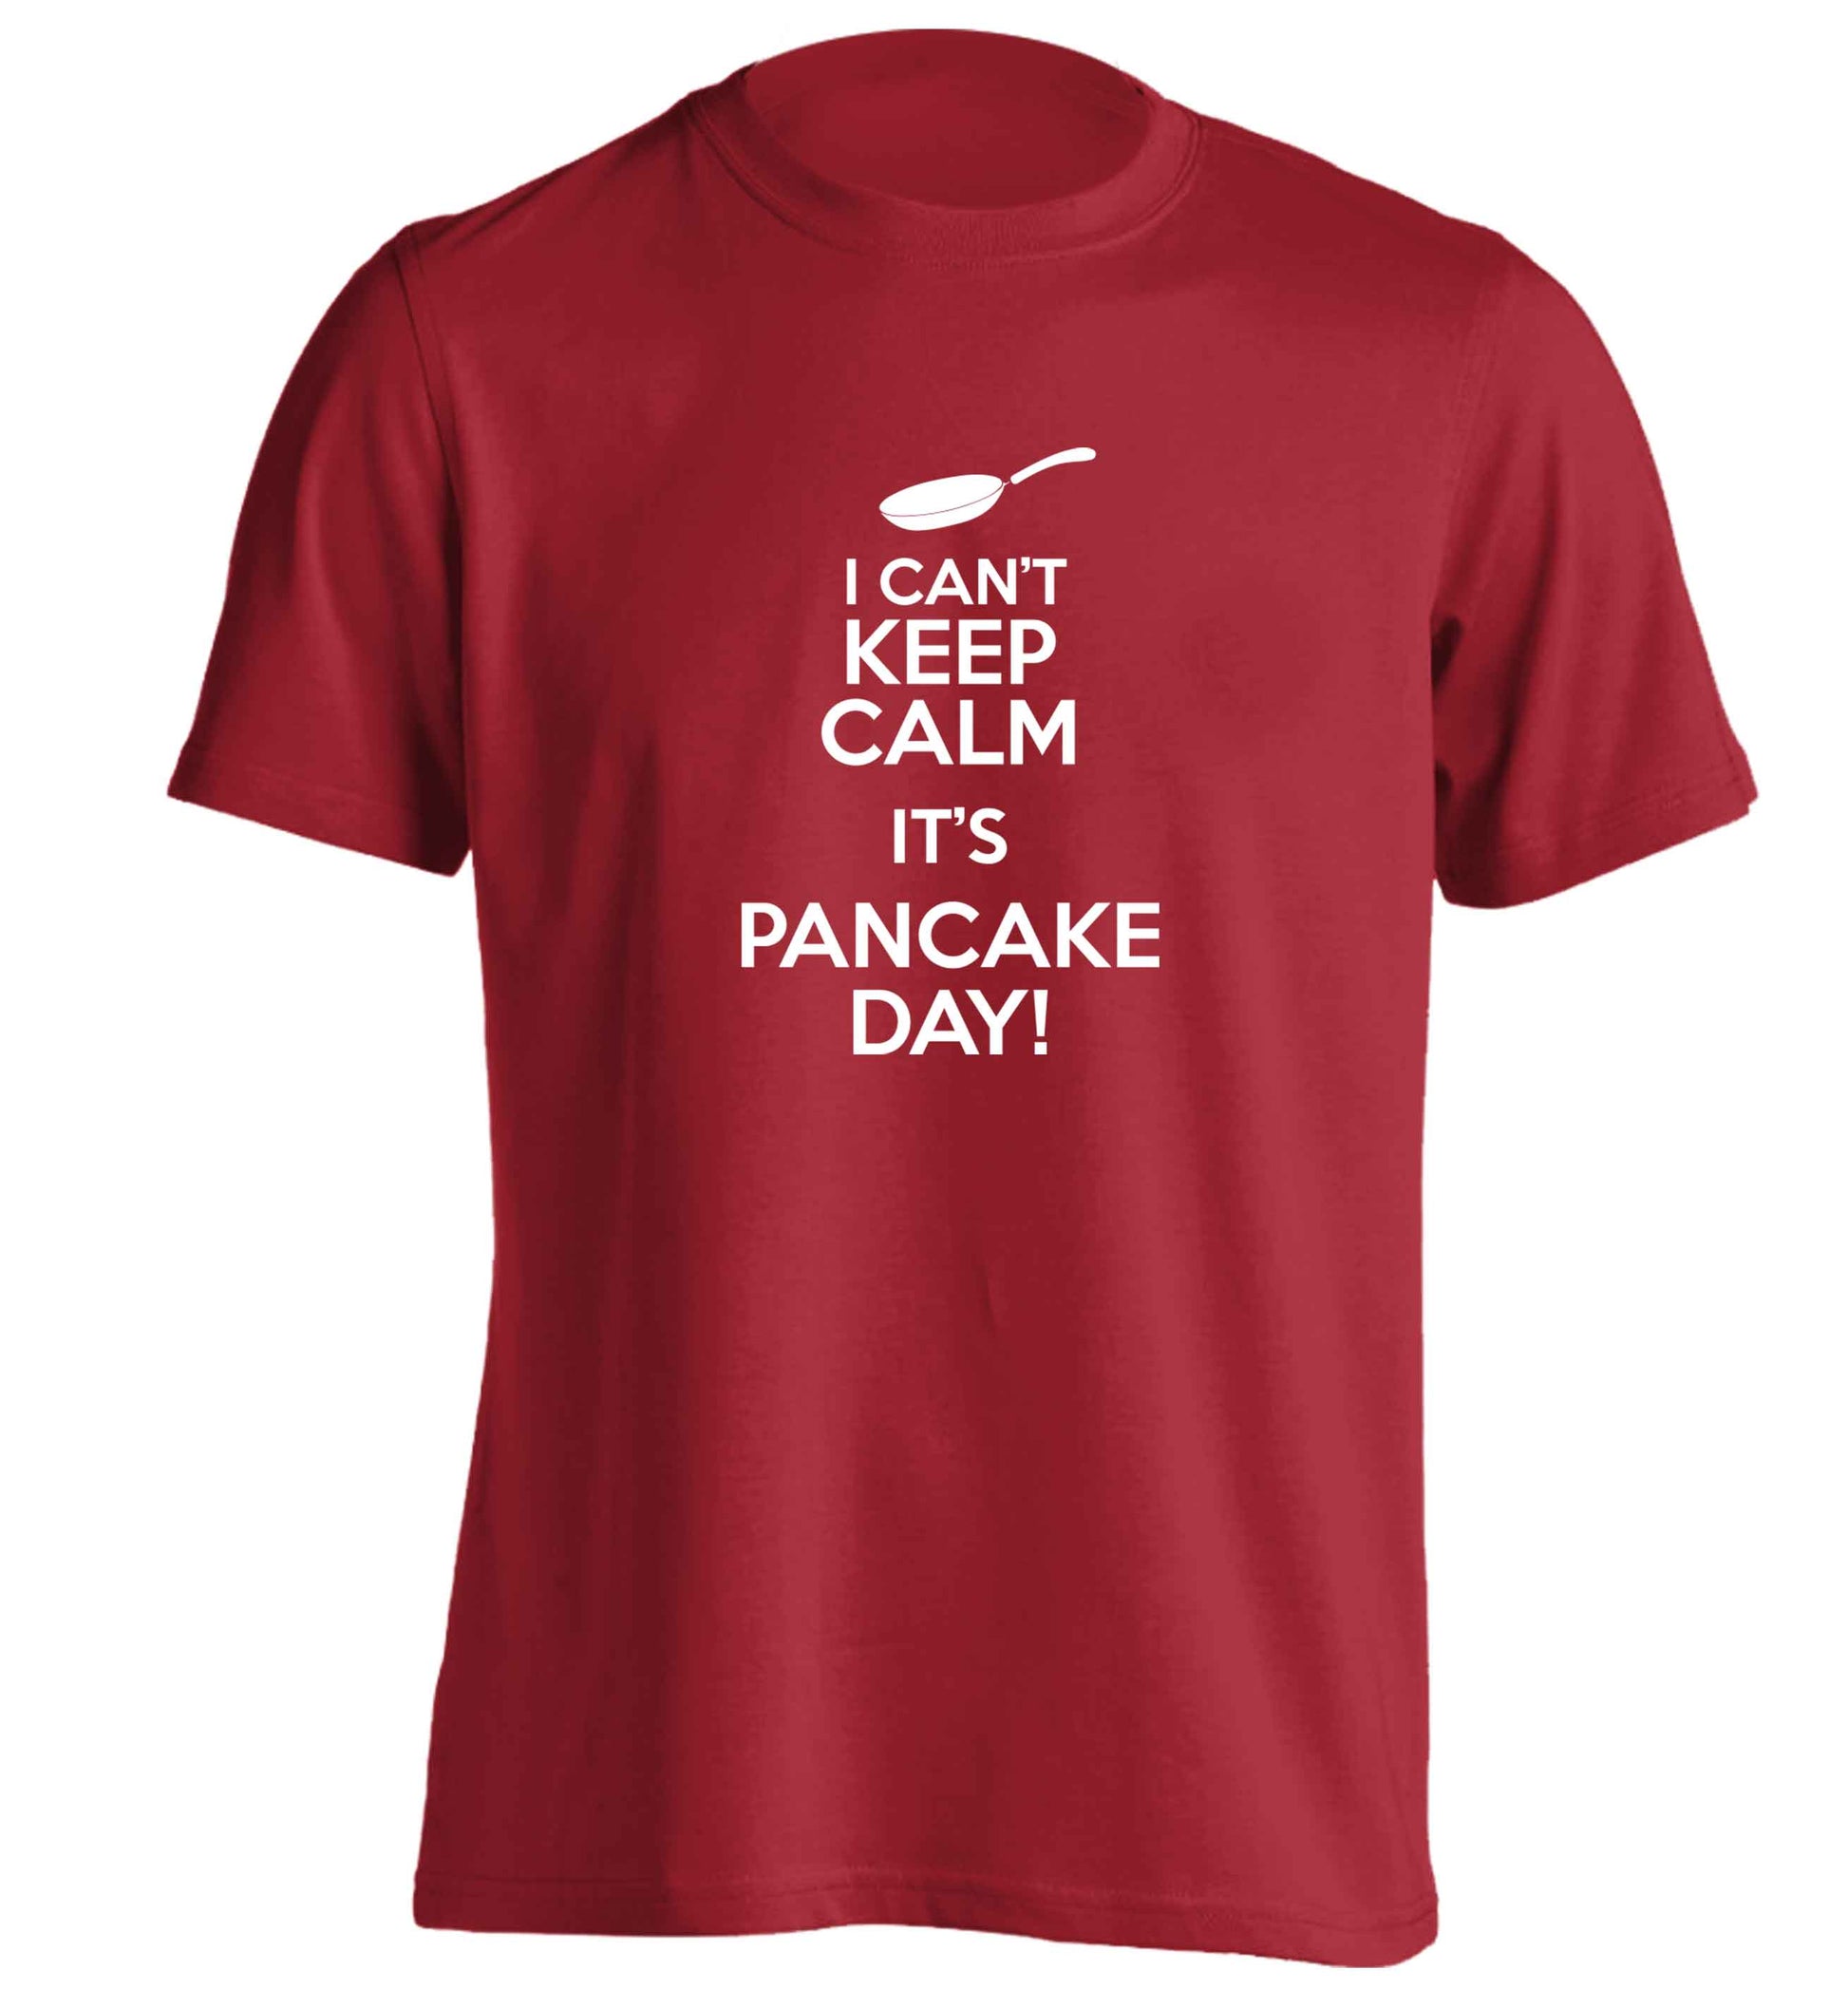 I can't keep calm it's pancake day! adults unisex red Tshirt 2XL